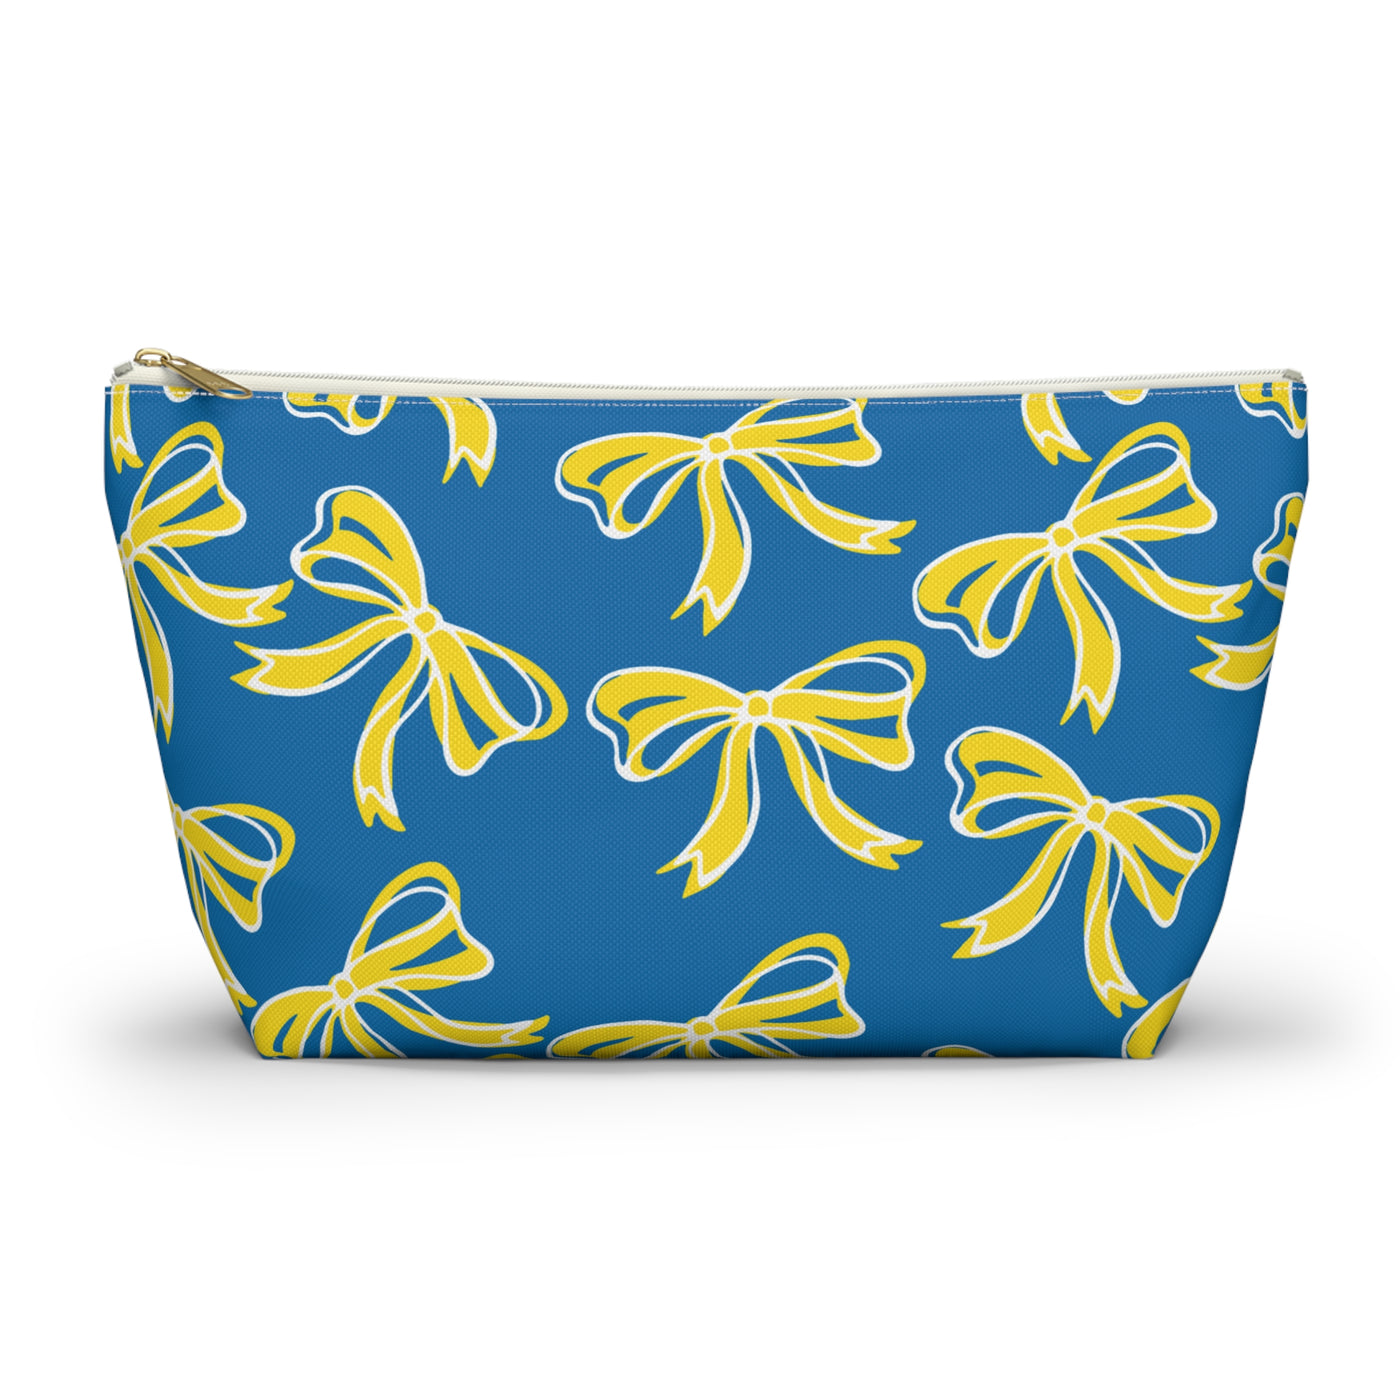 Trendy Bow Makeup Bag - Graduation Gift, Bed Party Gift, Acceptance Gift, College Gift, Delaware, Blue and Yellow, Blue Hens